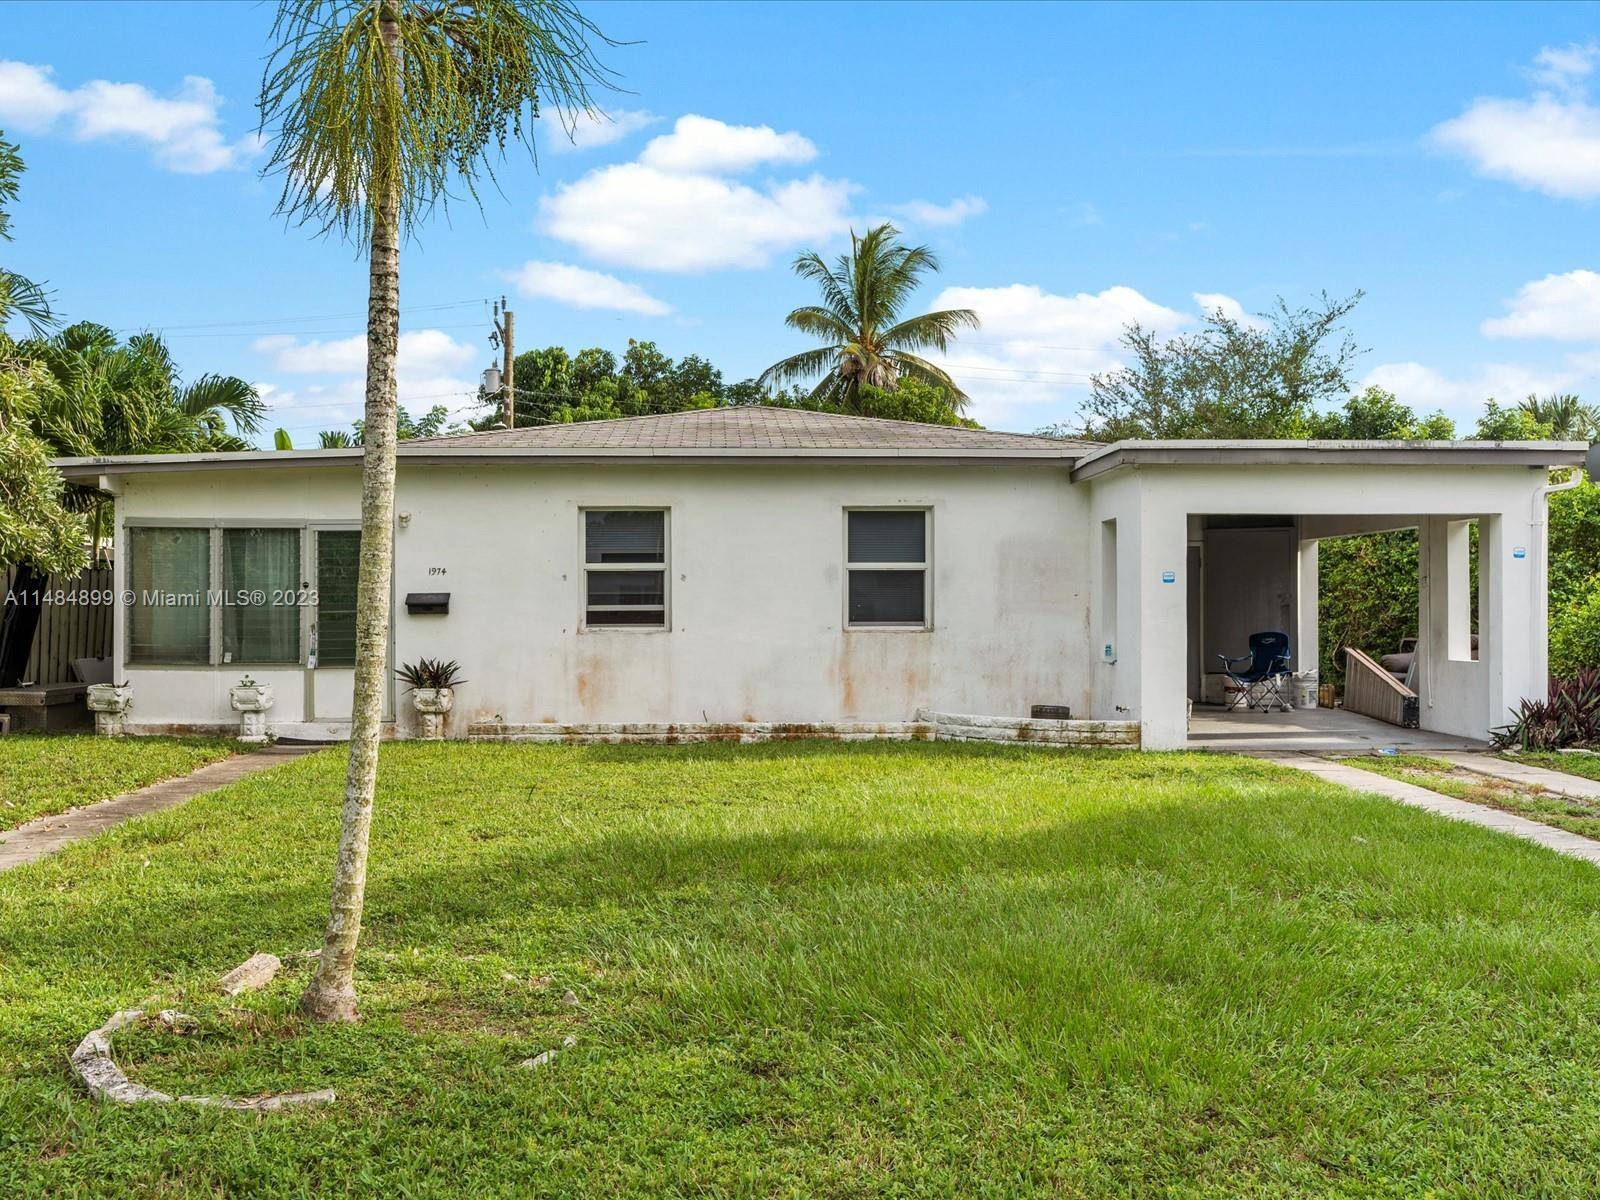 LOCATION, LOCATION PRICED TO SELL This semi remodeled home features 3 bedrooms, 1 bathroom, and a host of recent upgrades including a kitchen, bathroom, floors, and air conditioning.